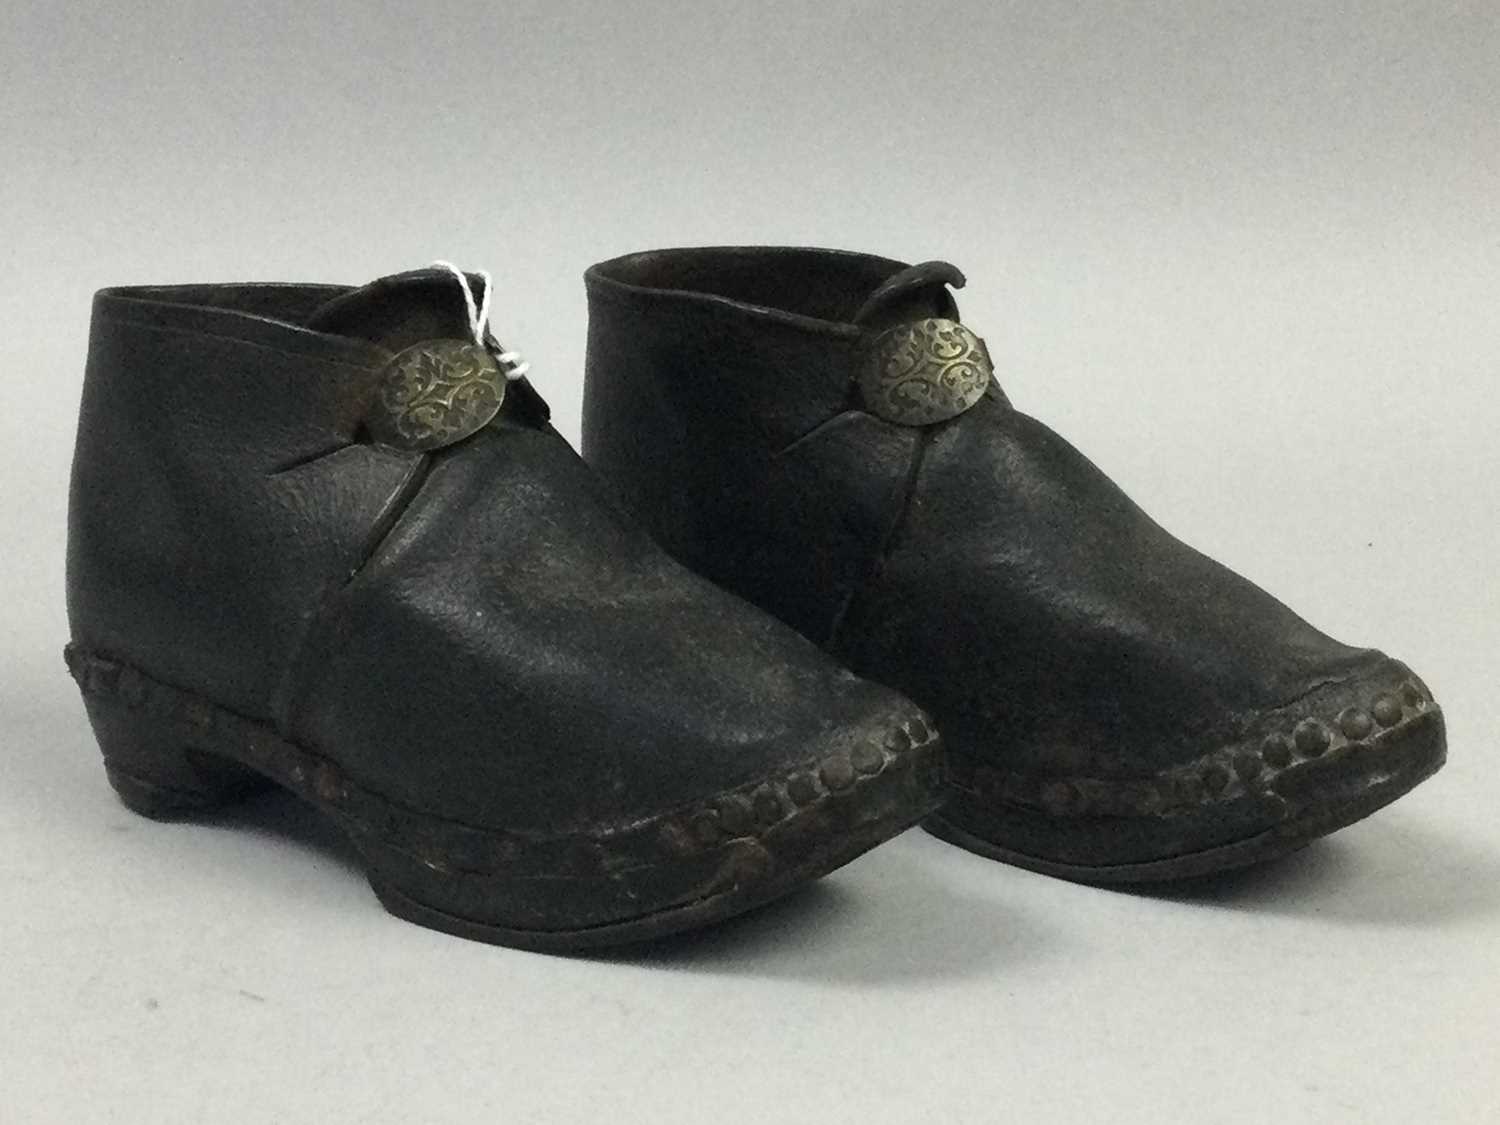 Lot 55 - A PAIR OF 19TH CENTURY SCOTTISH CHILDREN'S SHOES